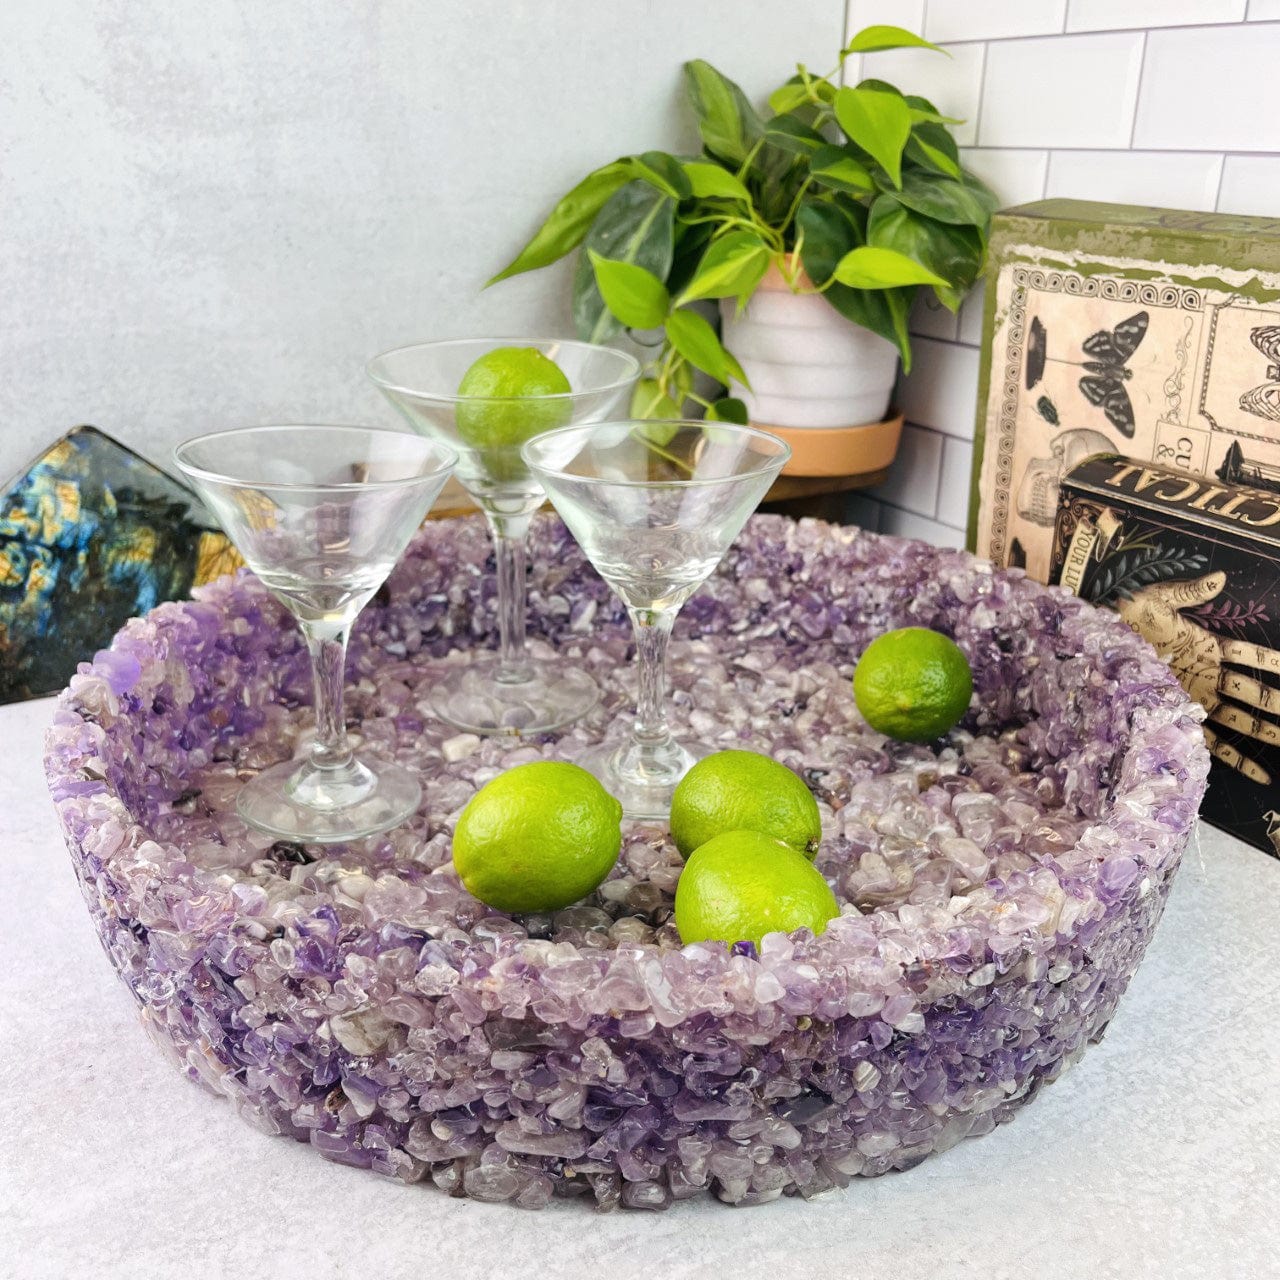 amethyst stone bowl with 3 glasses and some limes in it